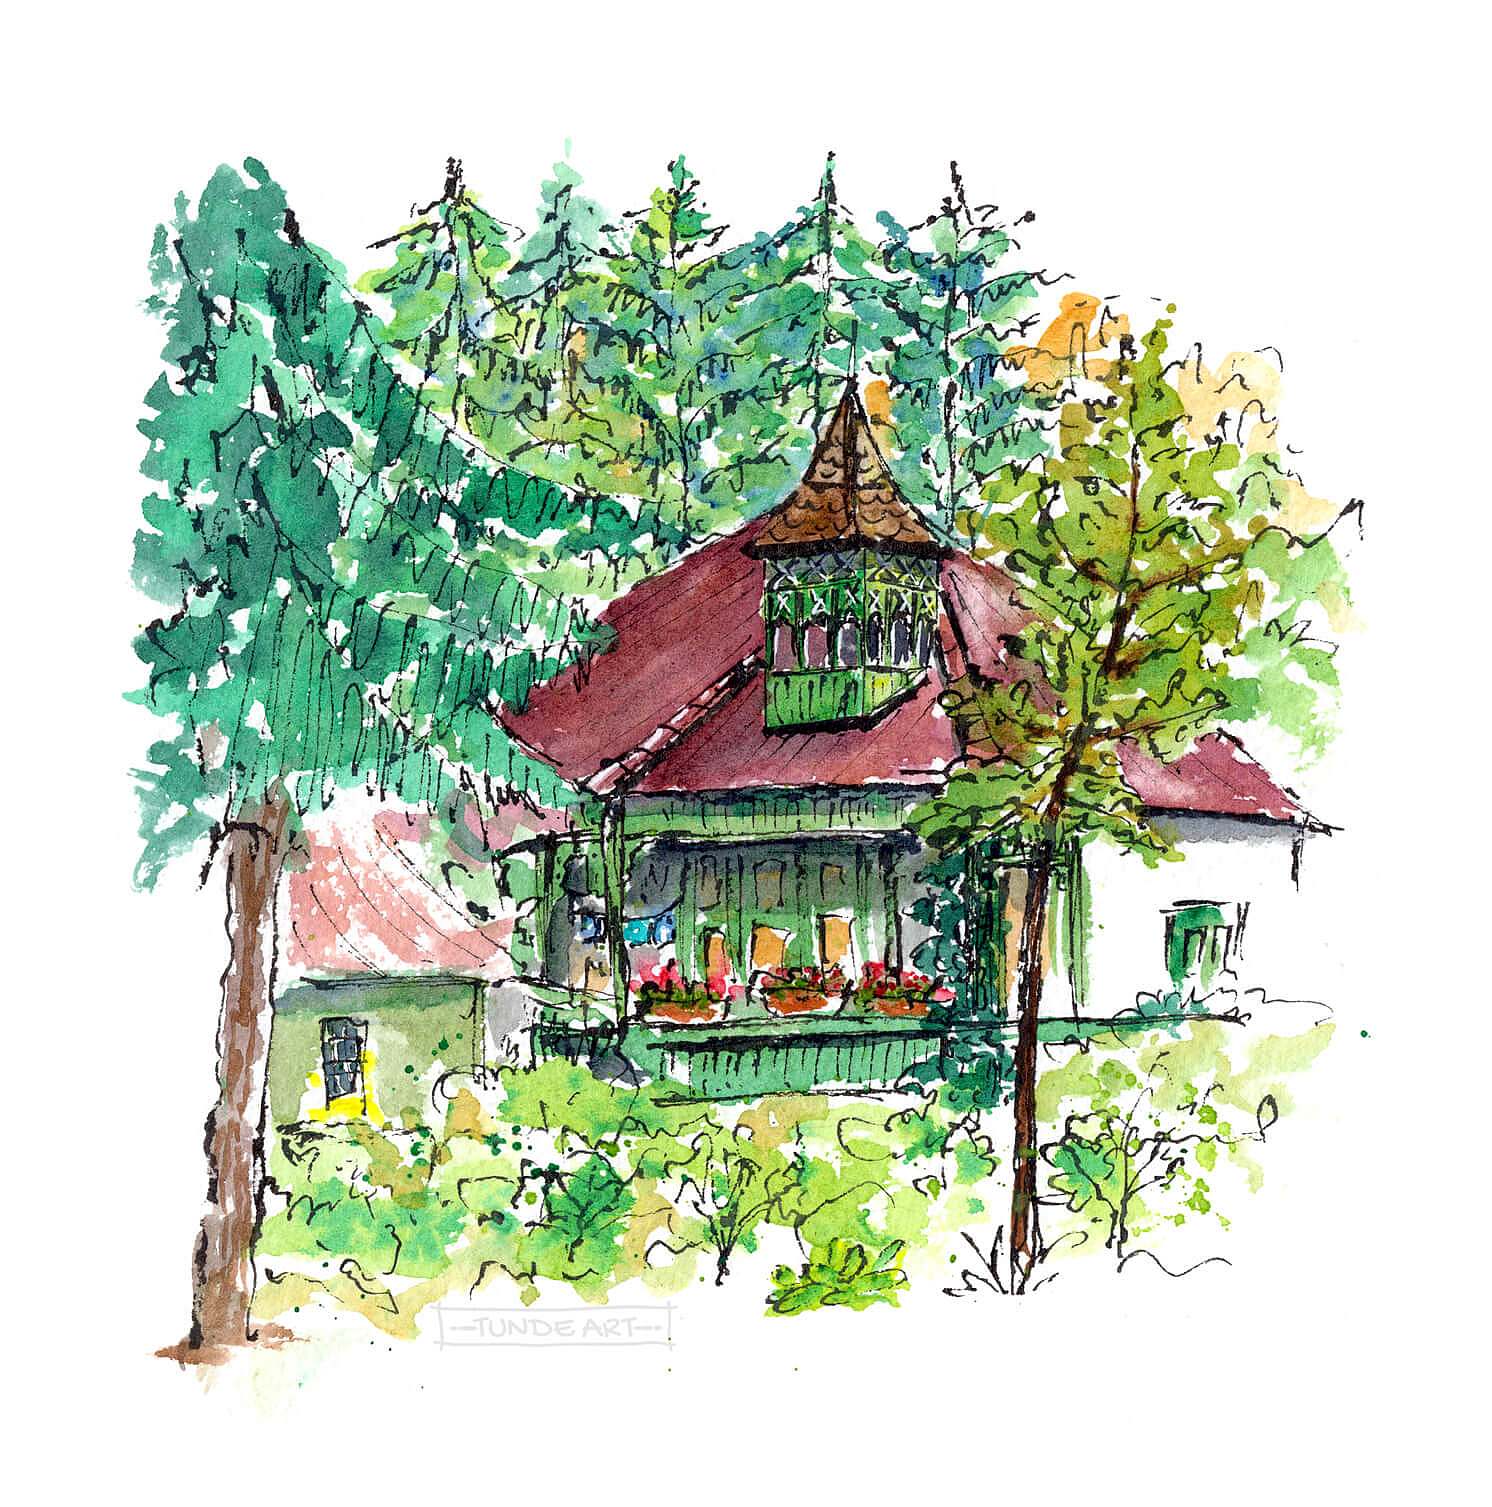 Villa in the forest at Szováta by Tunde Szentes